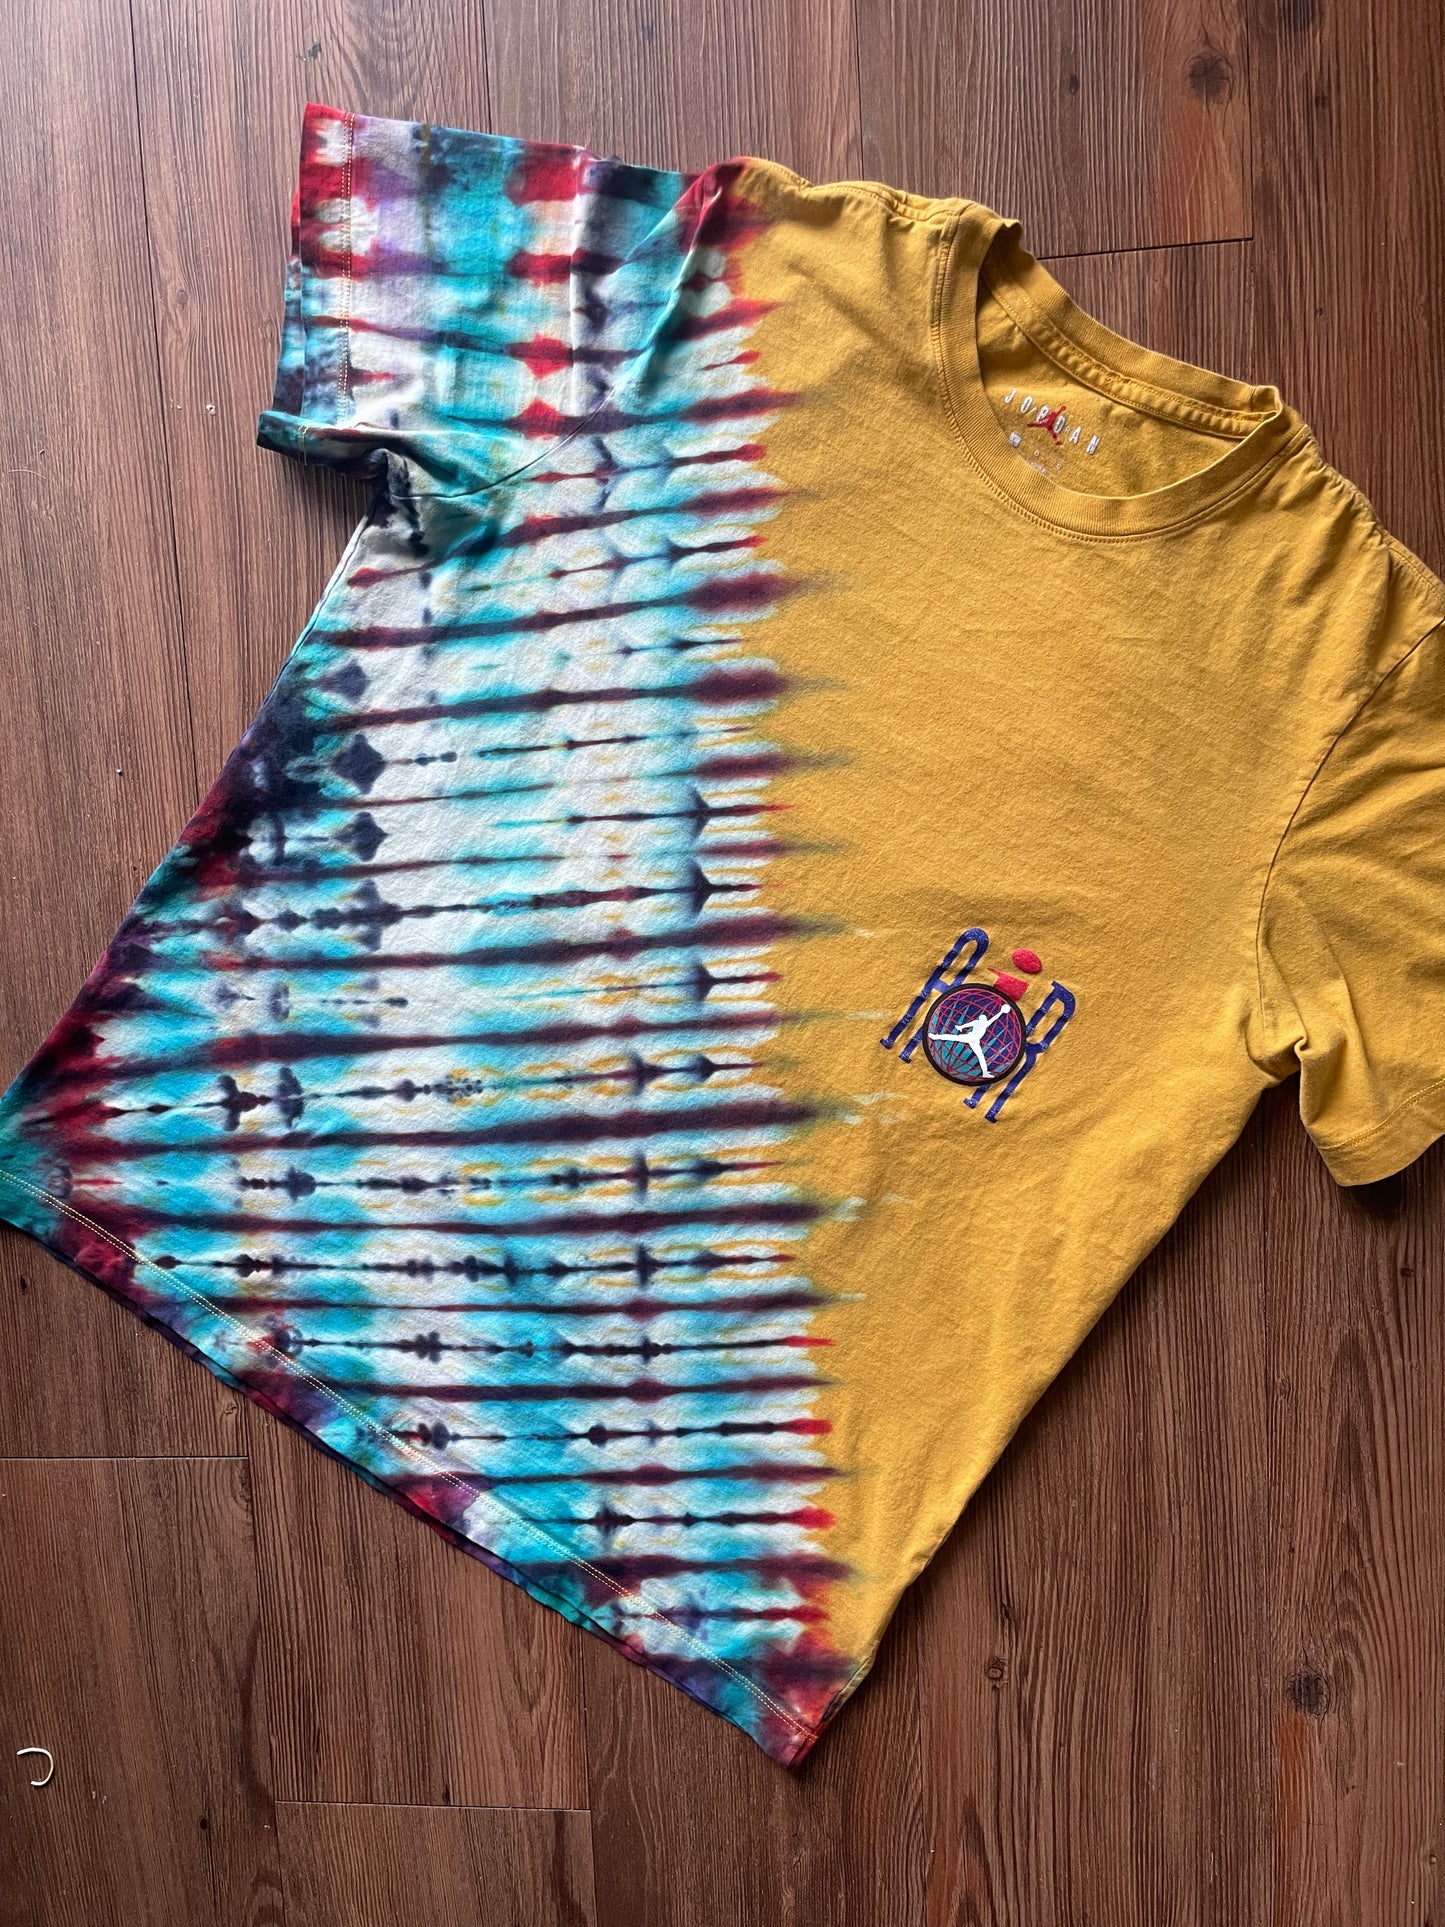 LARGE Men’s Vintage 90s Air Jordan Handmade Tie Dye T-Shirt | One-Of-a-Kind Yellow, Red, and Blue Pleated Bleach Dye Short Sleeve